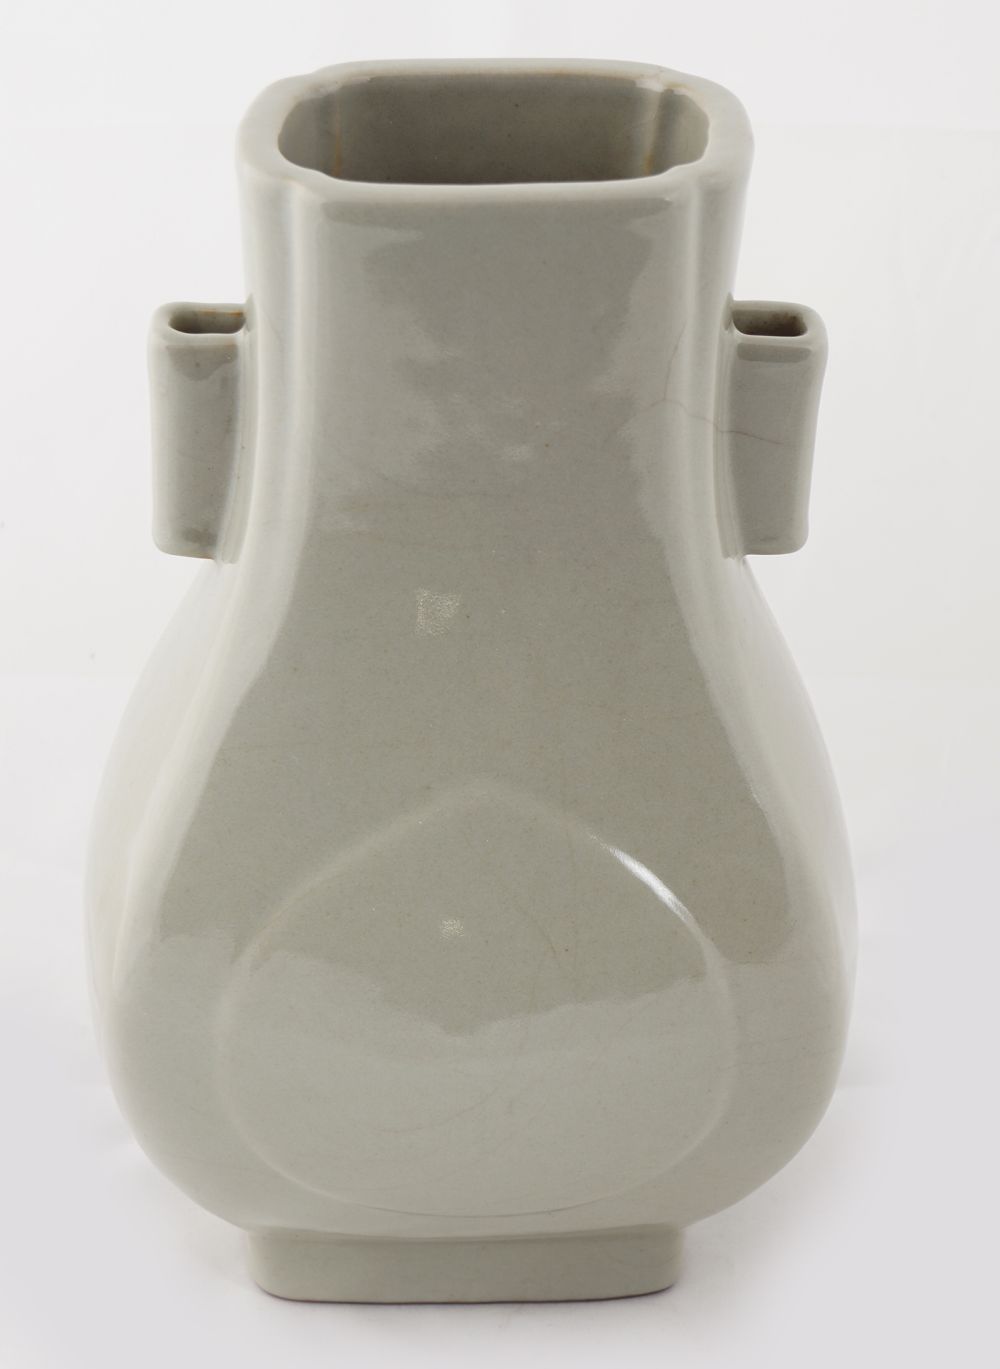 CHINESE QING PERIOD HU-SHAPED VASE - Image 2 of 10